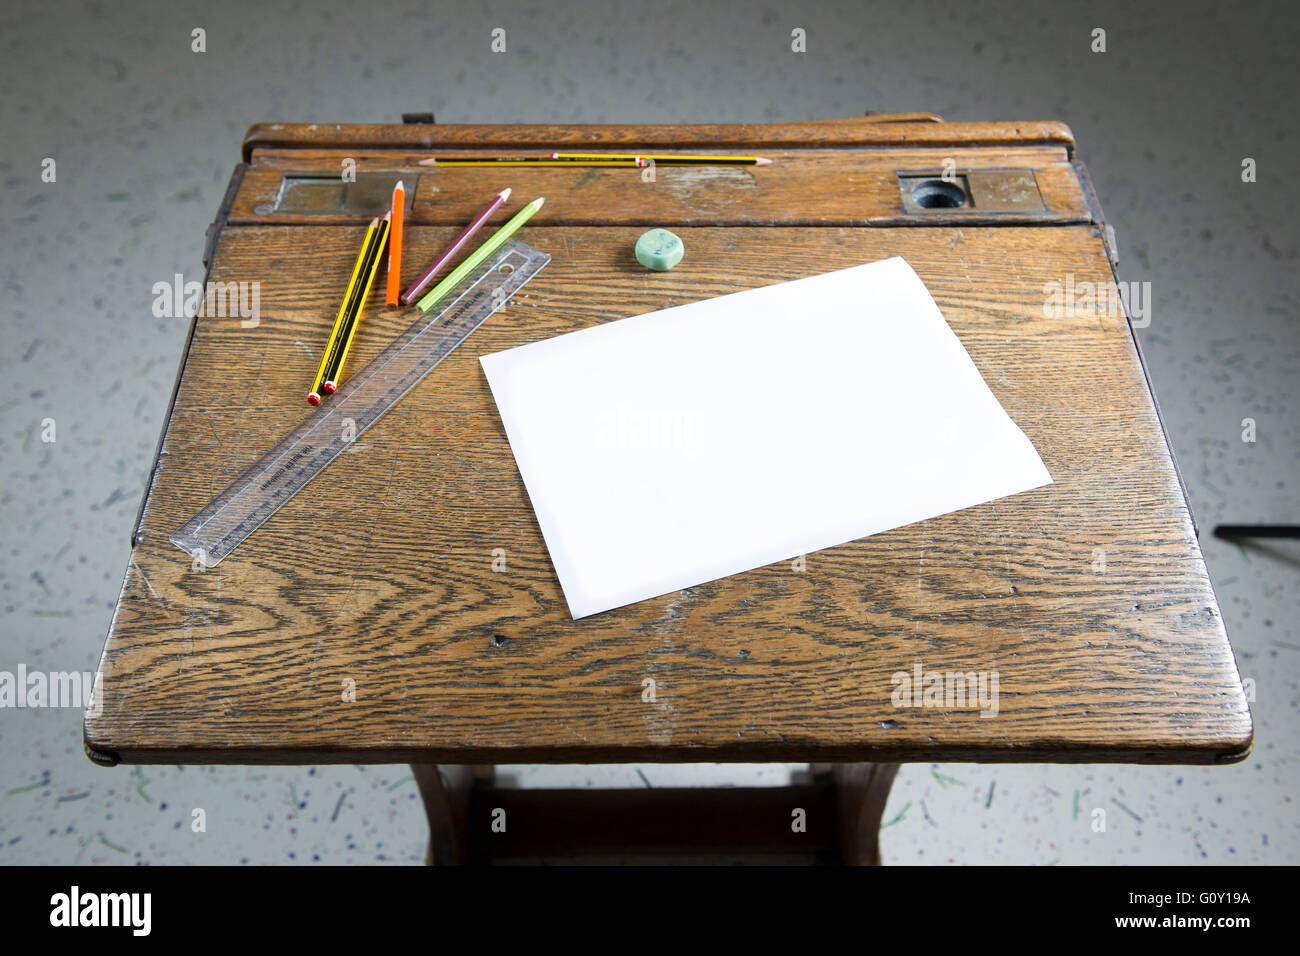 Old wooden school exam desk ready for a student to sit an exam. Stock Photo